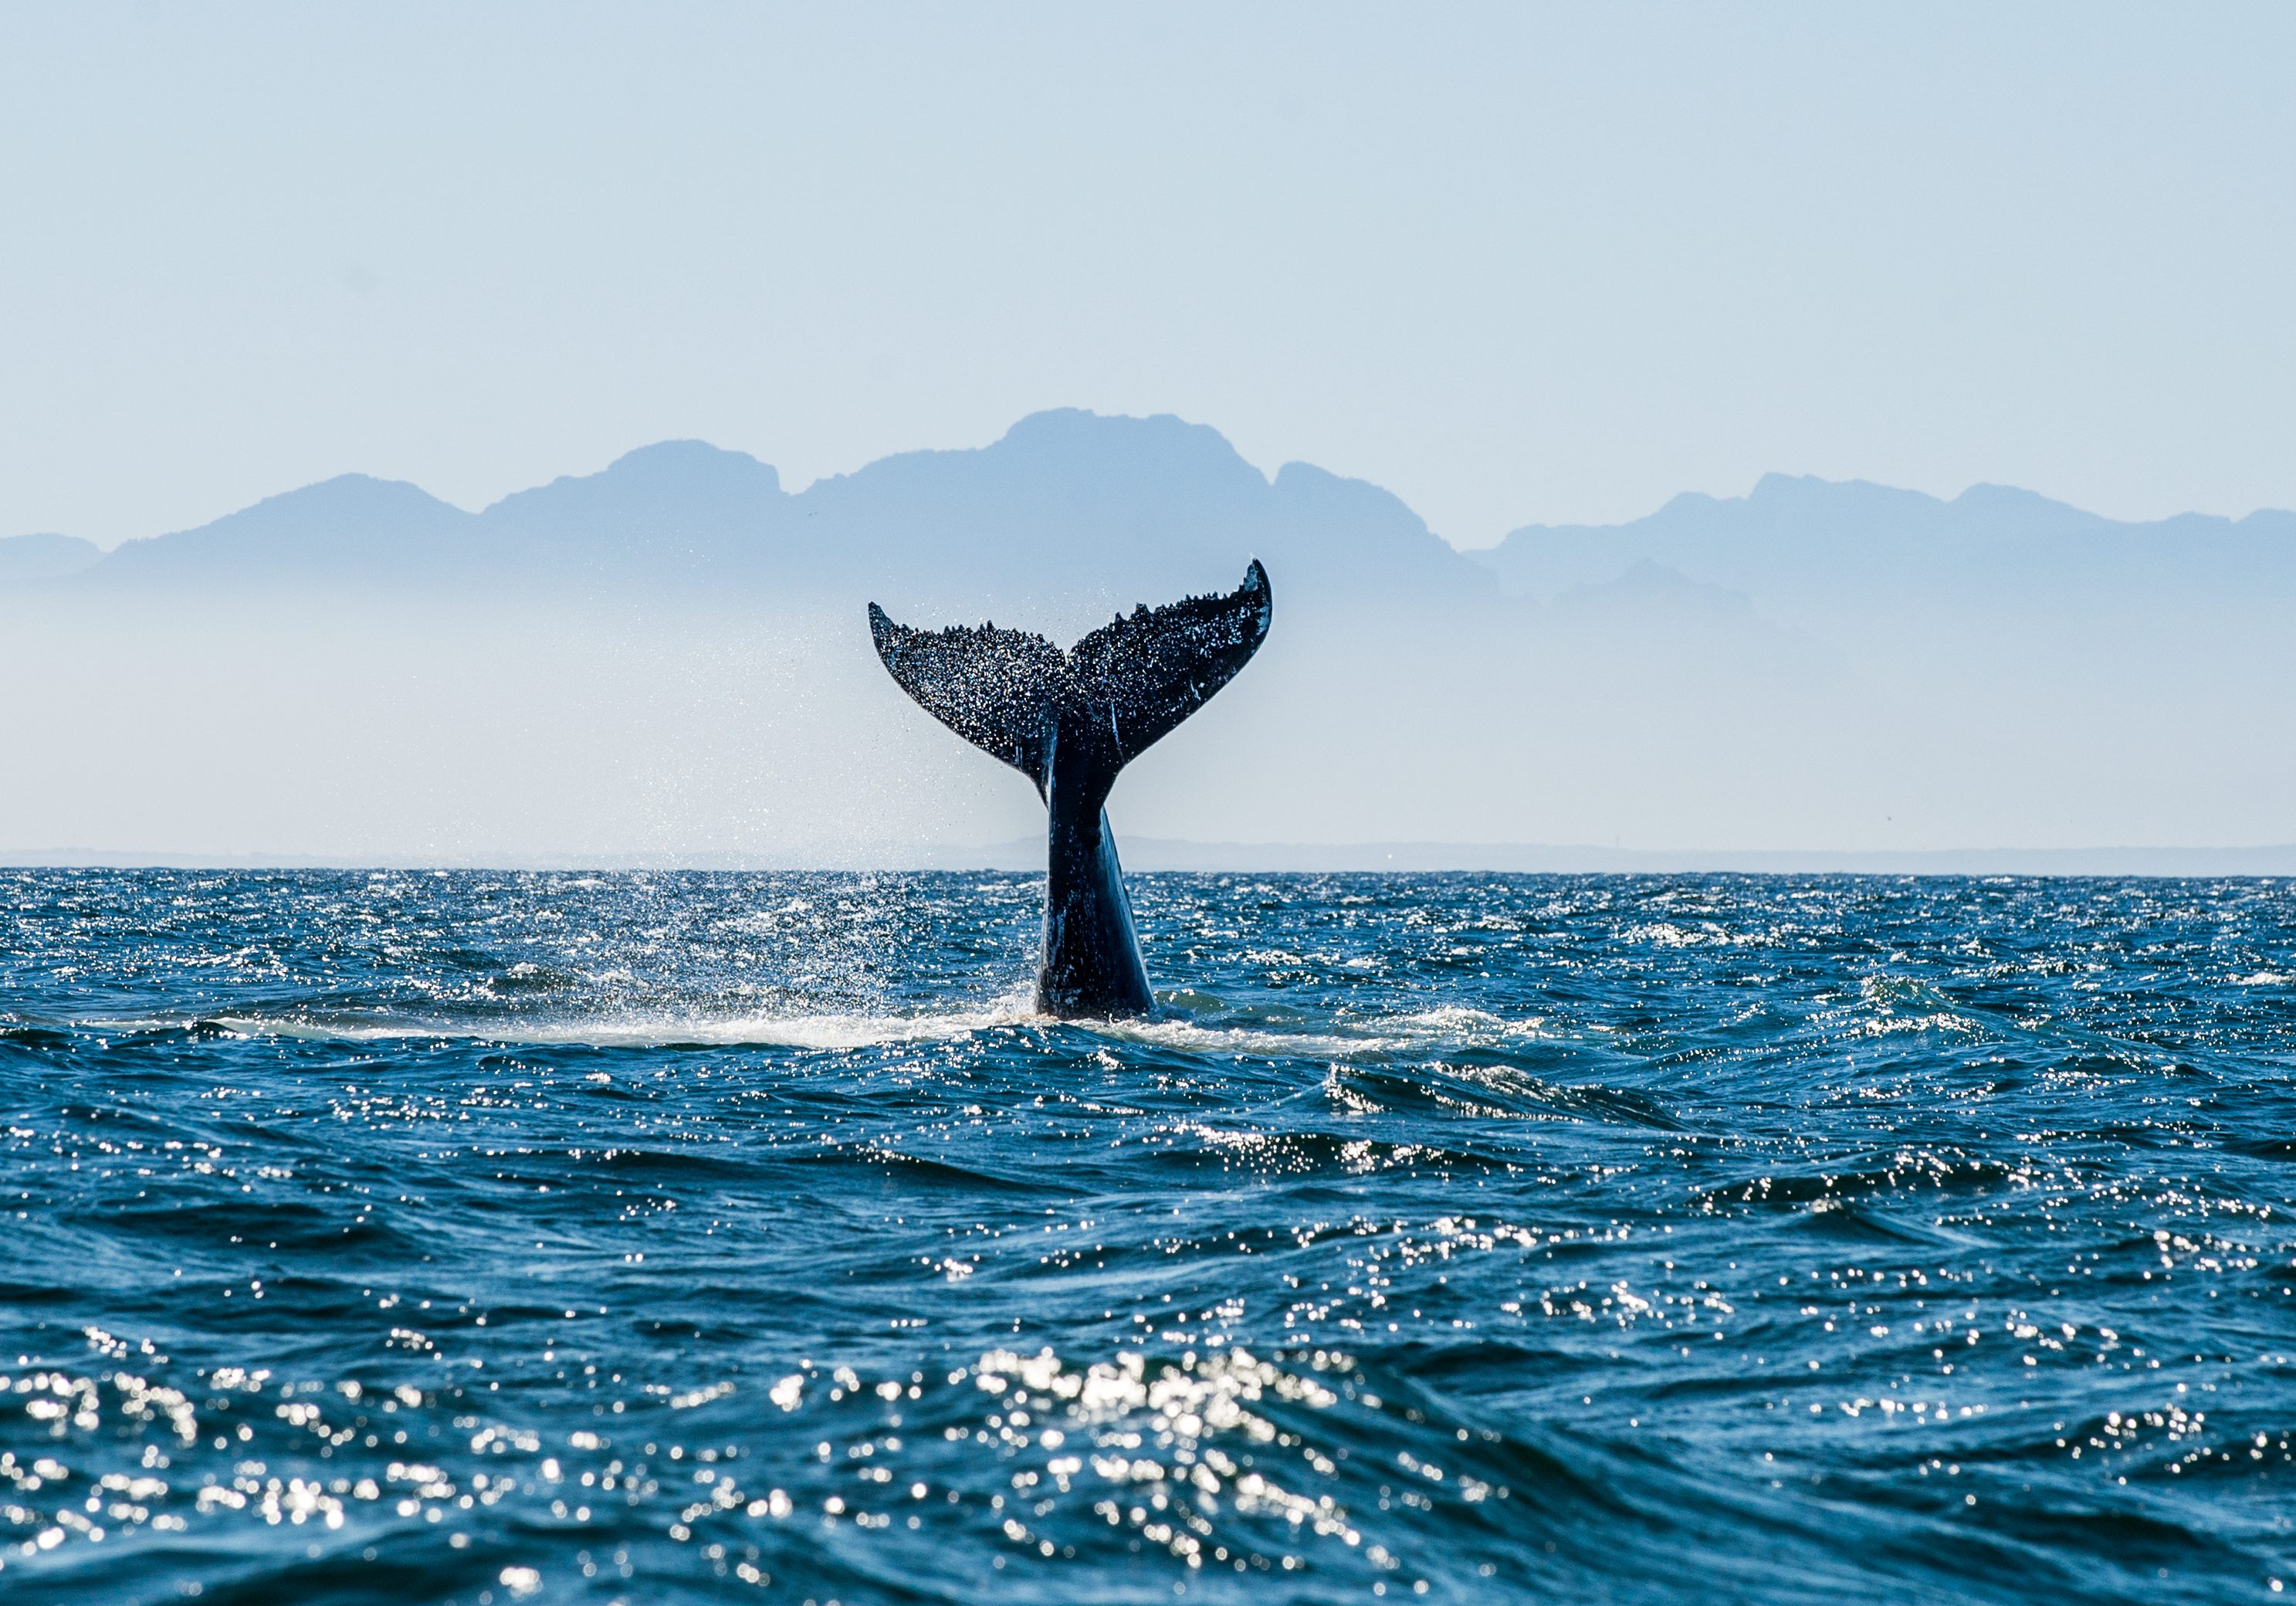 Whales, South Africa, Sunset over Kogel Bay, Western Cape, South Africa,Spirit of Adventure, Downton Distillery